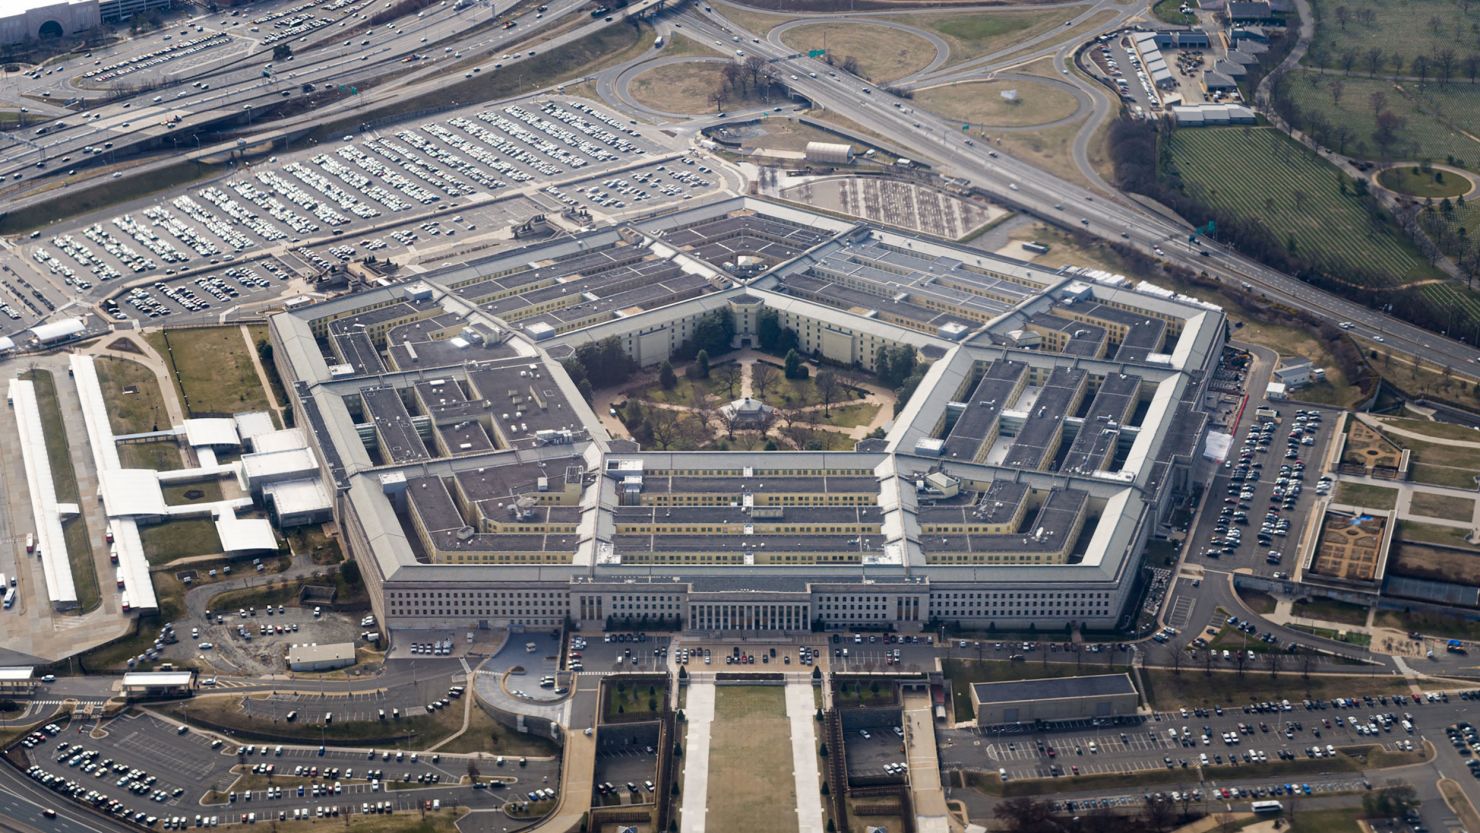 The Pentagon is seen from the air in Washington, U.S., March 3, 2022, more than a week after Russia invaded Ukraine.